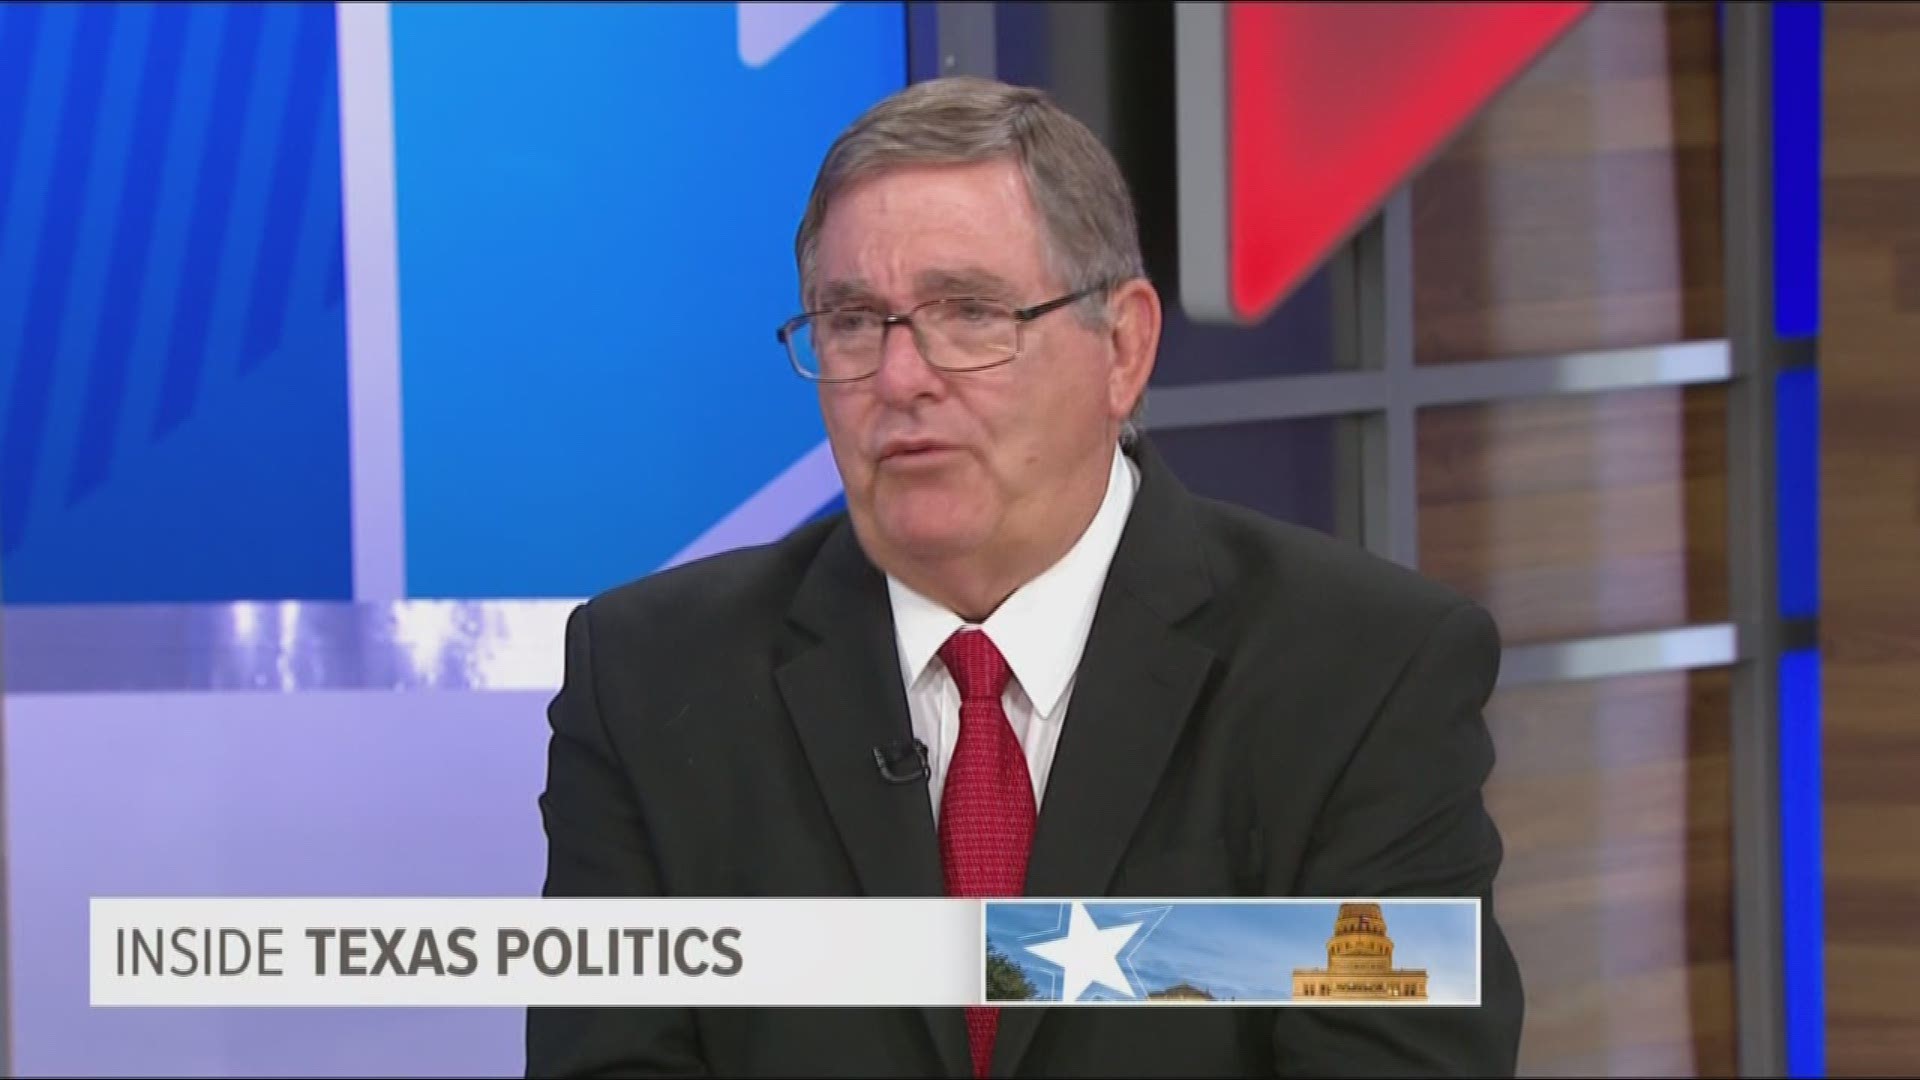 U.S. Representative Michael Burgess joined host Jason Wheeler (filling in for Jason Whitely) and Bud Kennedy of the Fort Worth Star-Telegram. Rep. Burgess represents most of Denton and portions or Tarrant counties.